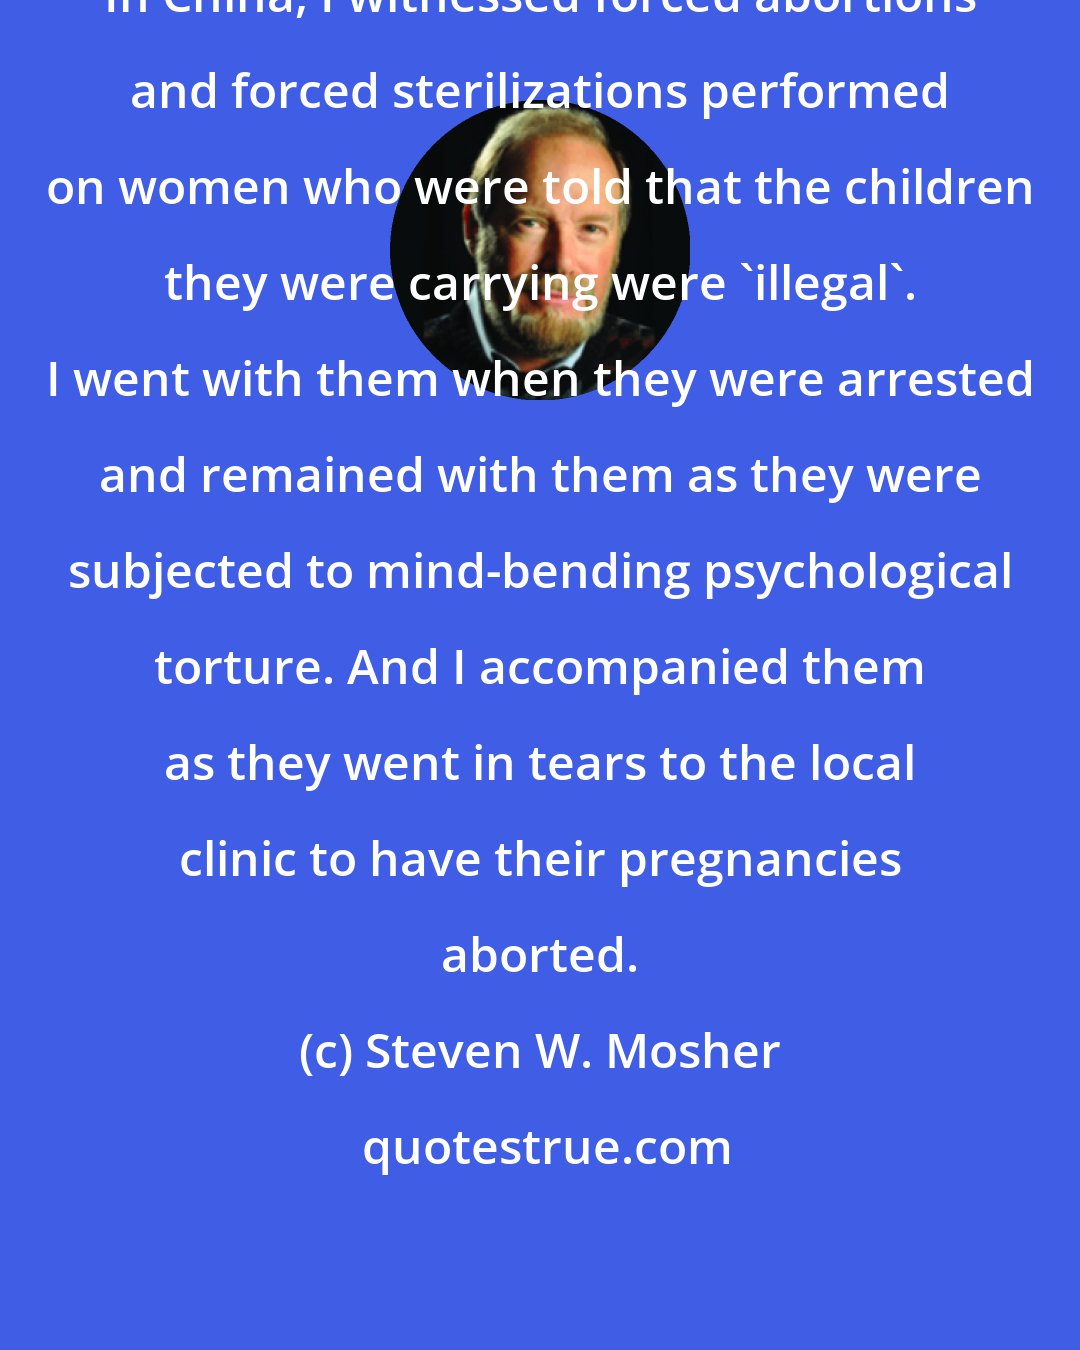 Steven W. Mosher: In China, I witnessed forced abortions and forced sterilizations performed on women who were told that the children they were carrying were 'illegal'. I went with them when they were arrested and remained with them as they were subjected to mind-bending psychological torture. And I accompanied them as they went in tears to the local clinic to have their pregnancies aborted.